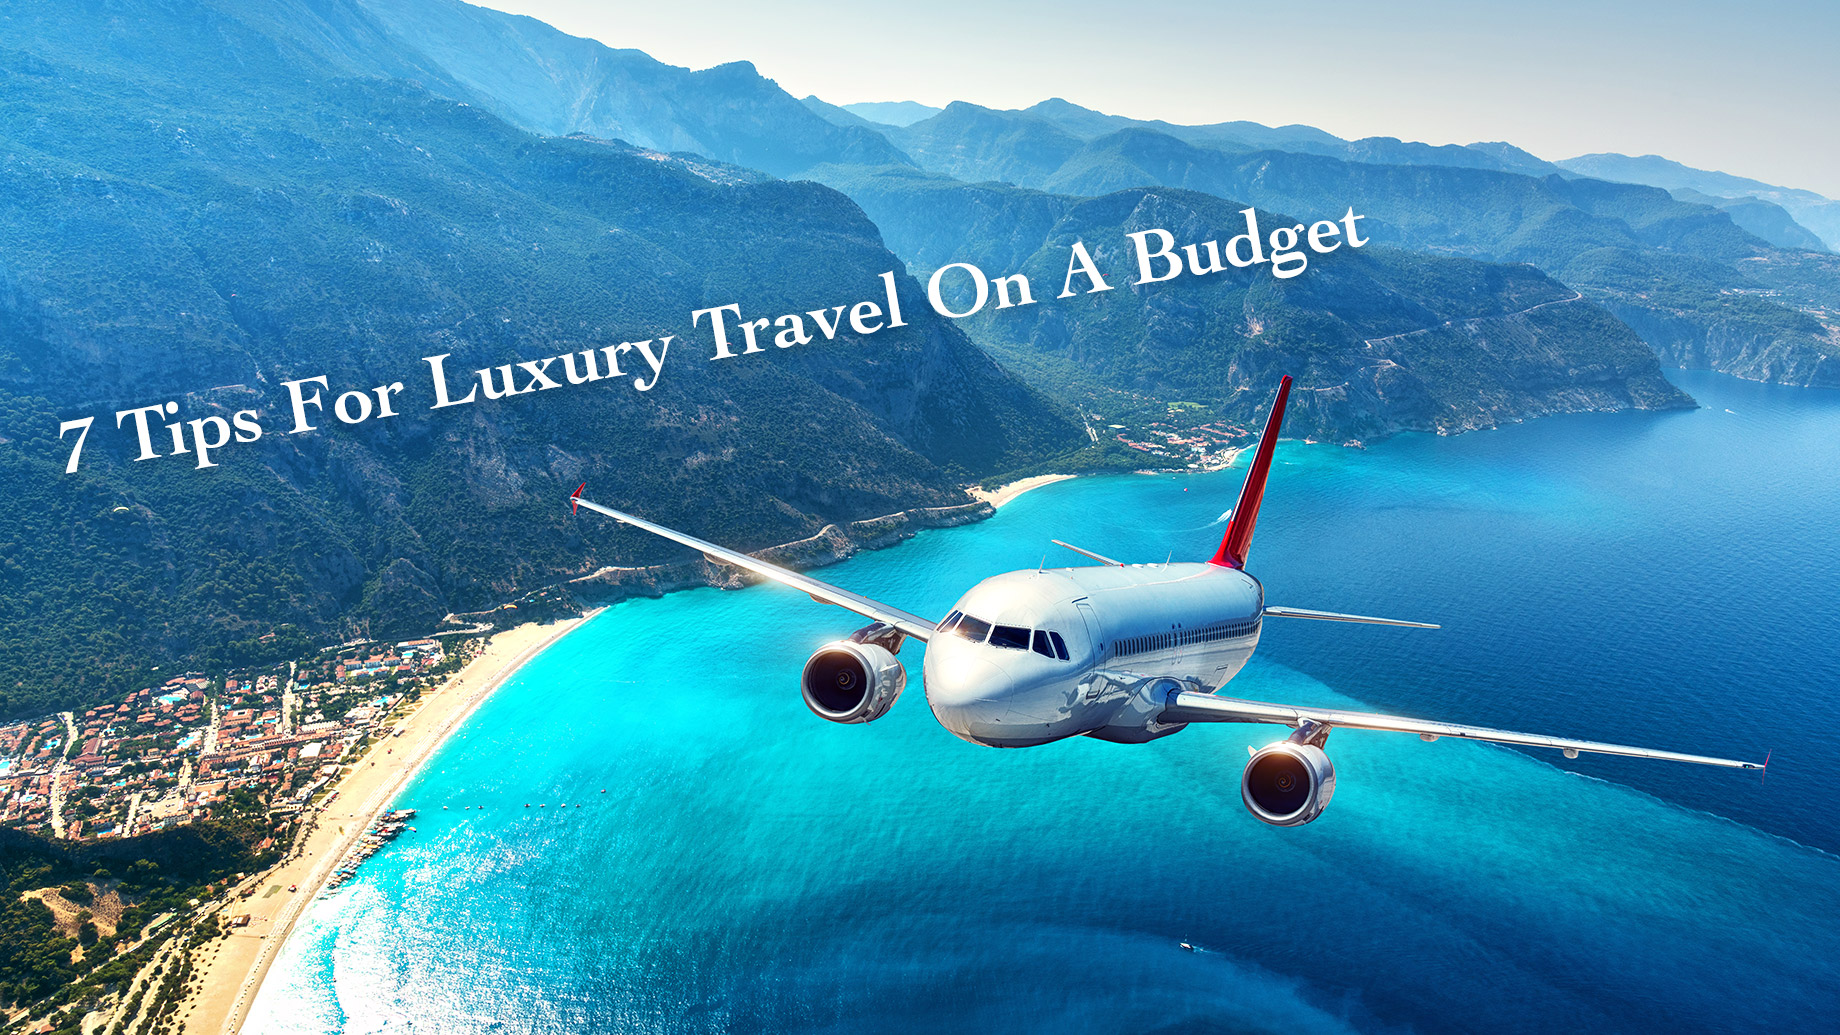 7 Tips For Luxury Travel On A Budget